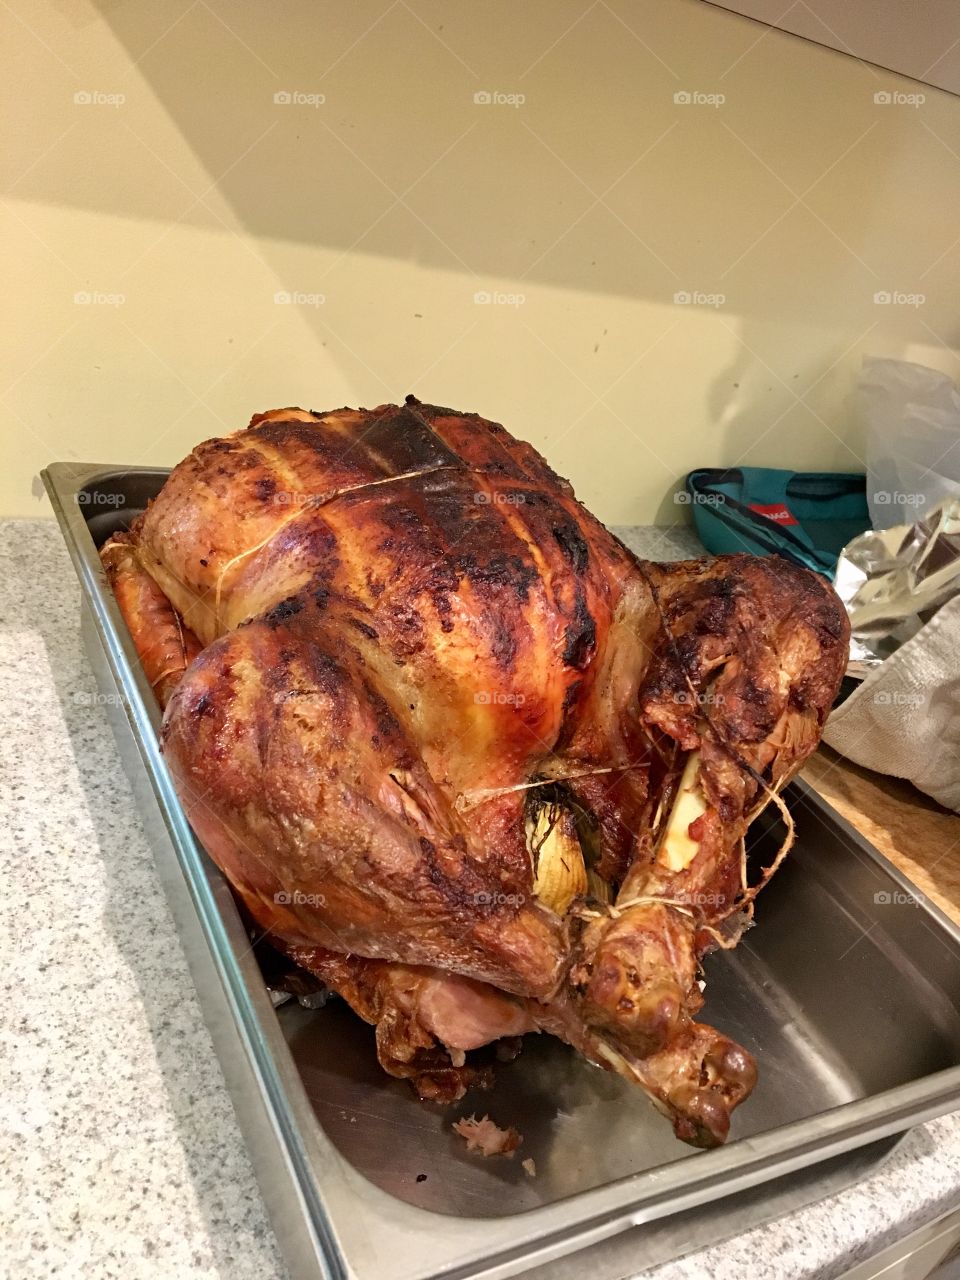 13 kg turkey, happy thanksgiving from France 